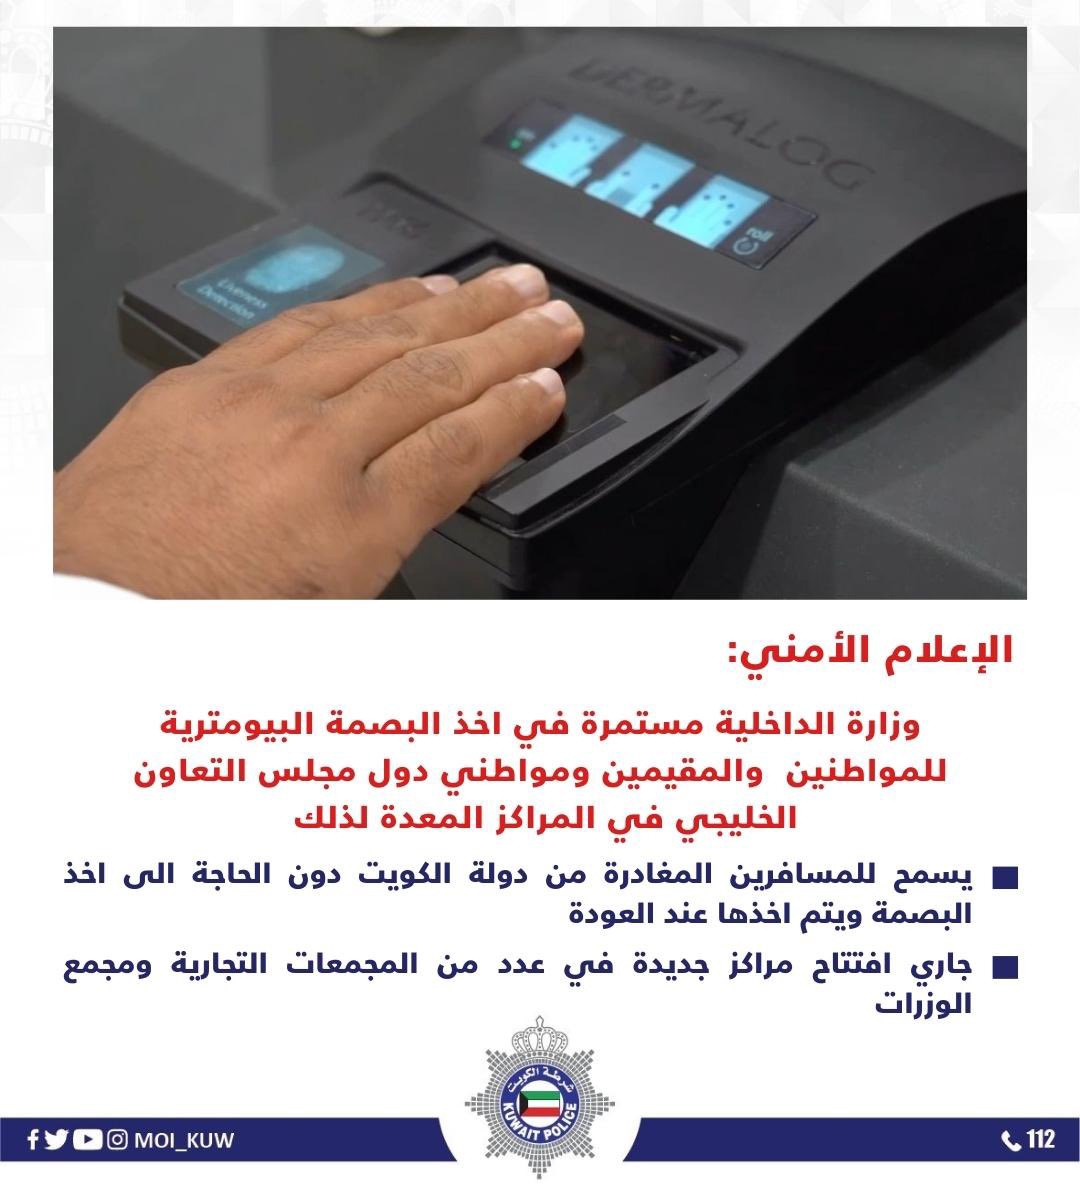 The MOI continues to take biometric fingerprints for citizens, residents and citizens